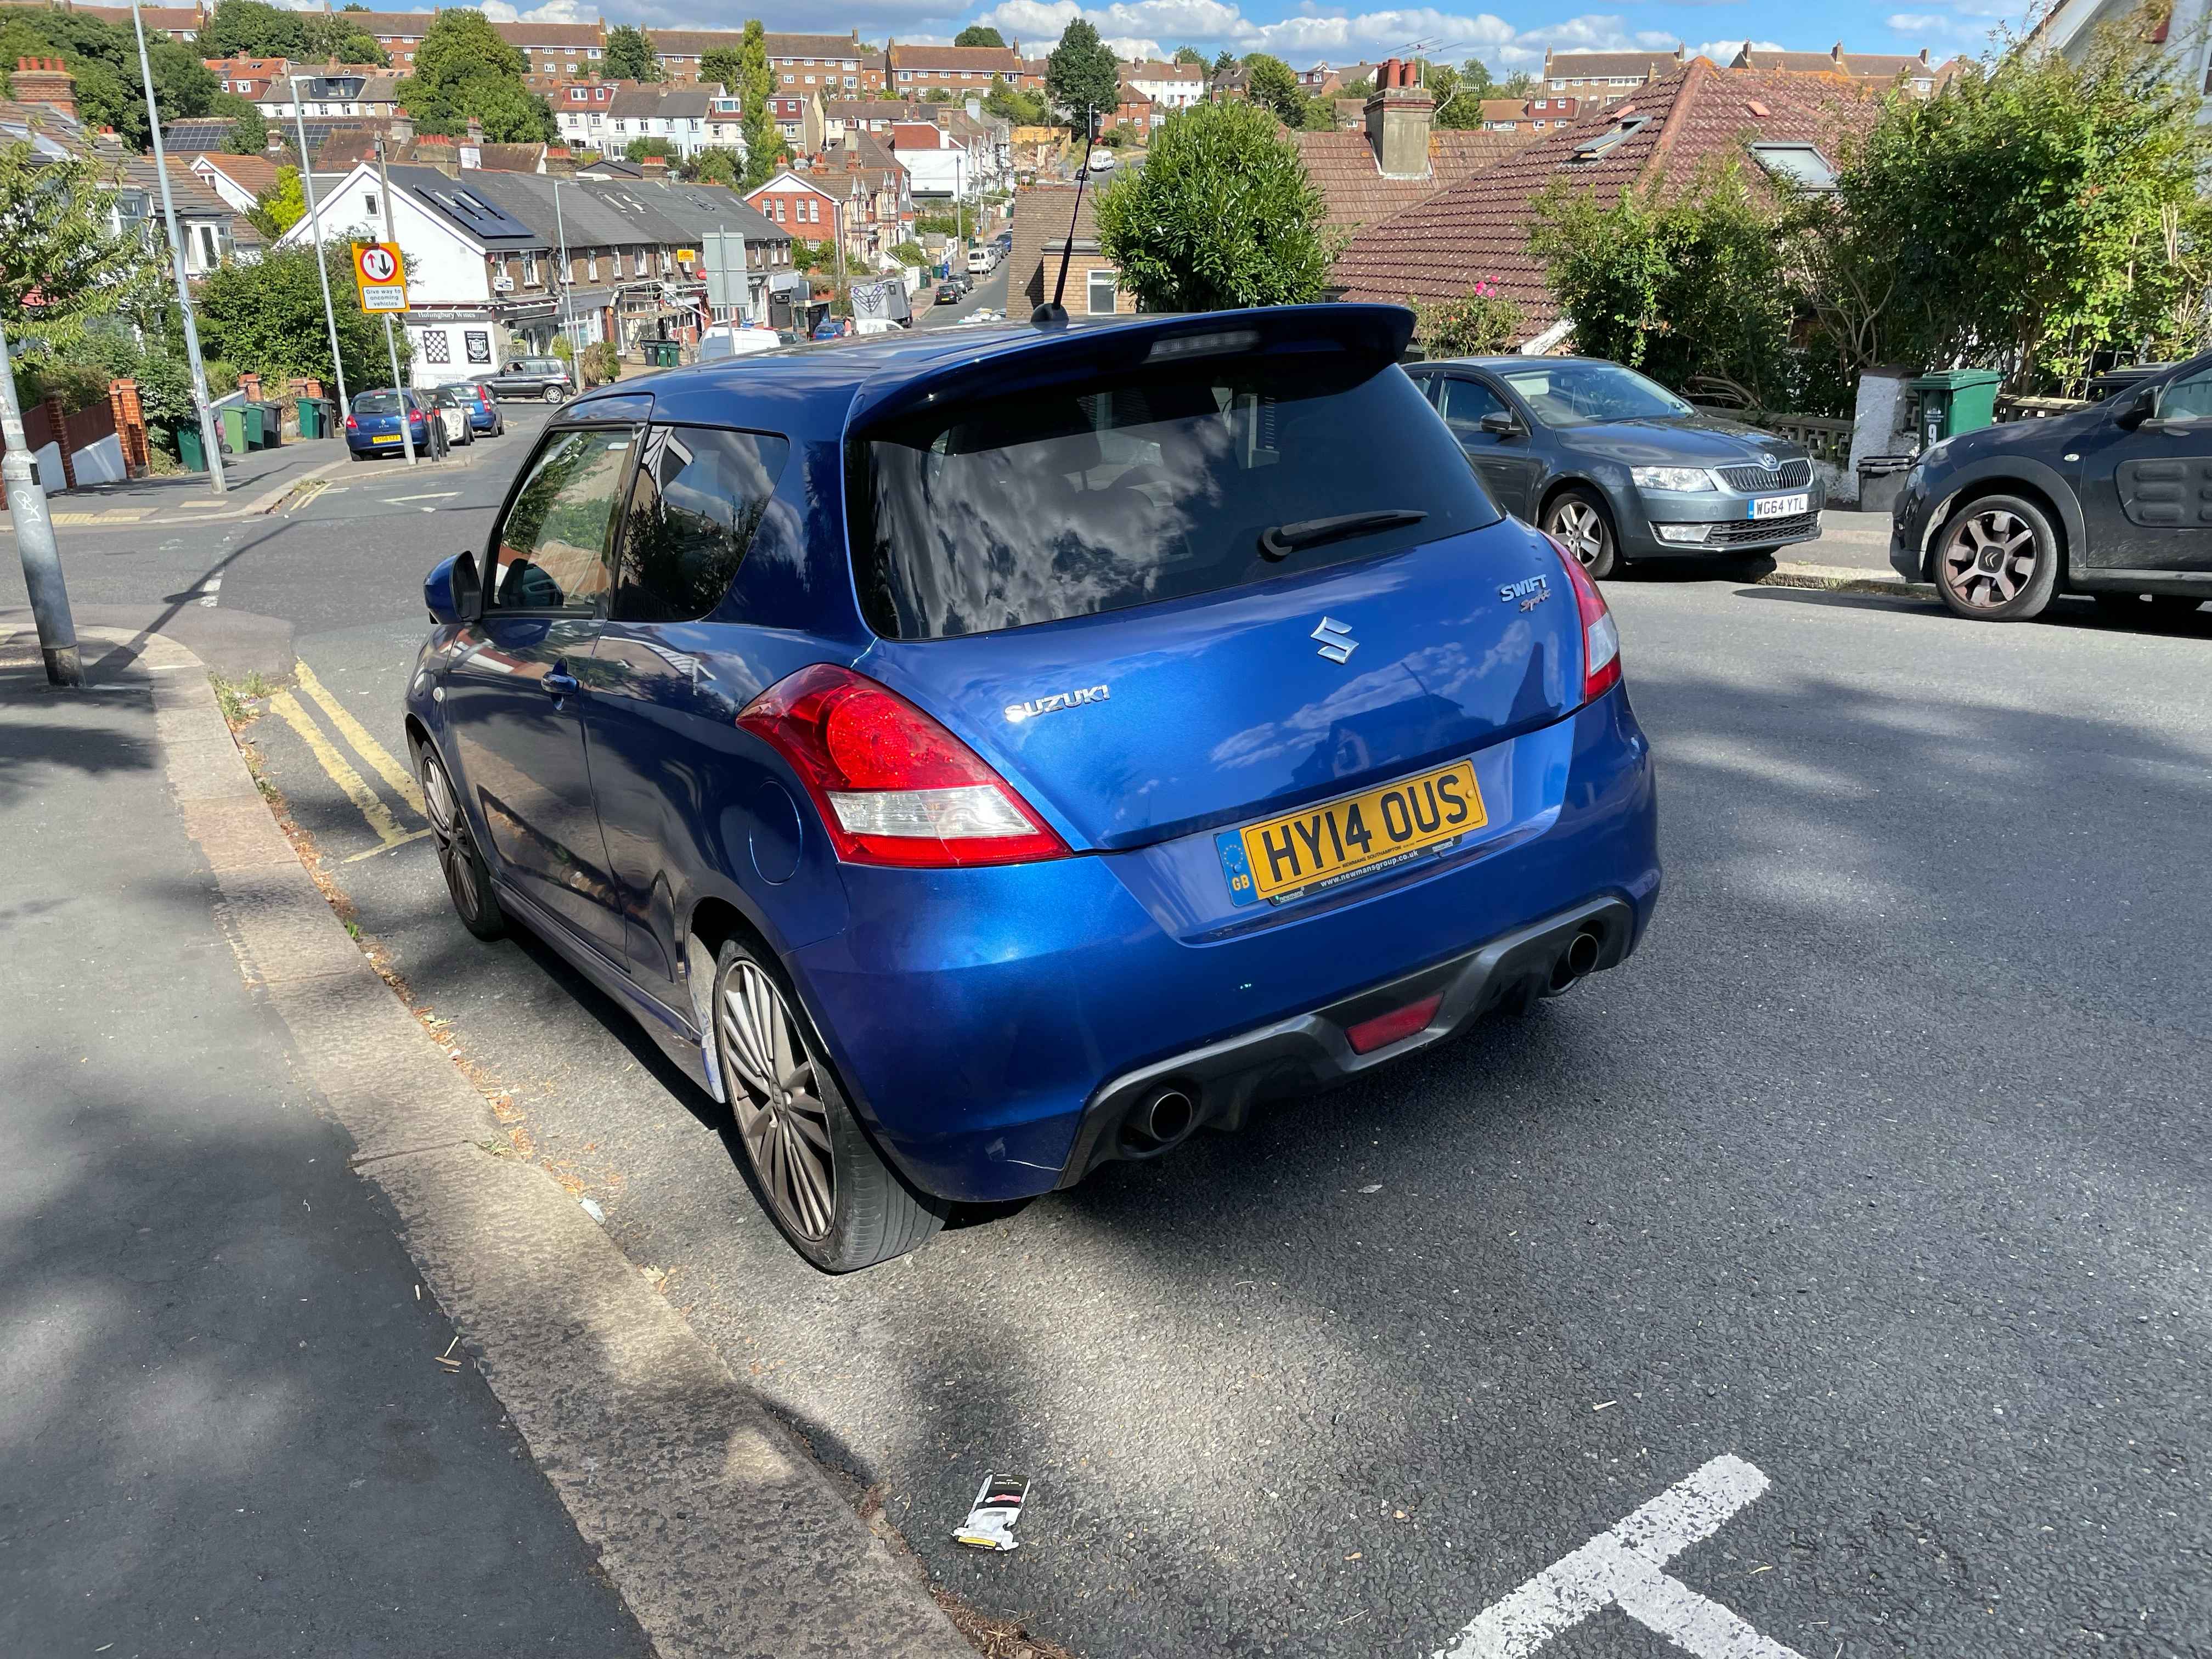 Photograph of HY14 OUS - a Blue Suzuki Swift parked in Hollingdean by a non-resident. The second of four photographs supplied by the residents of Hollingdean.